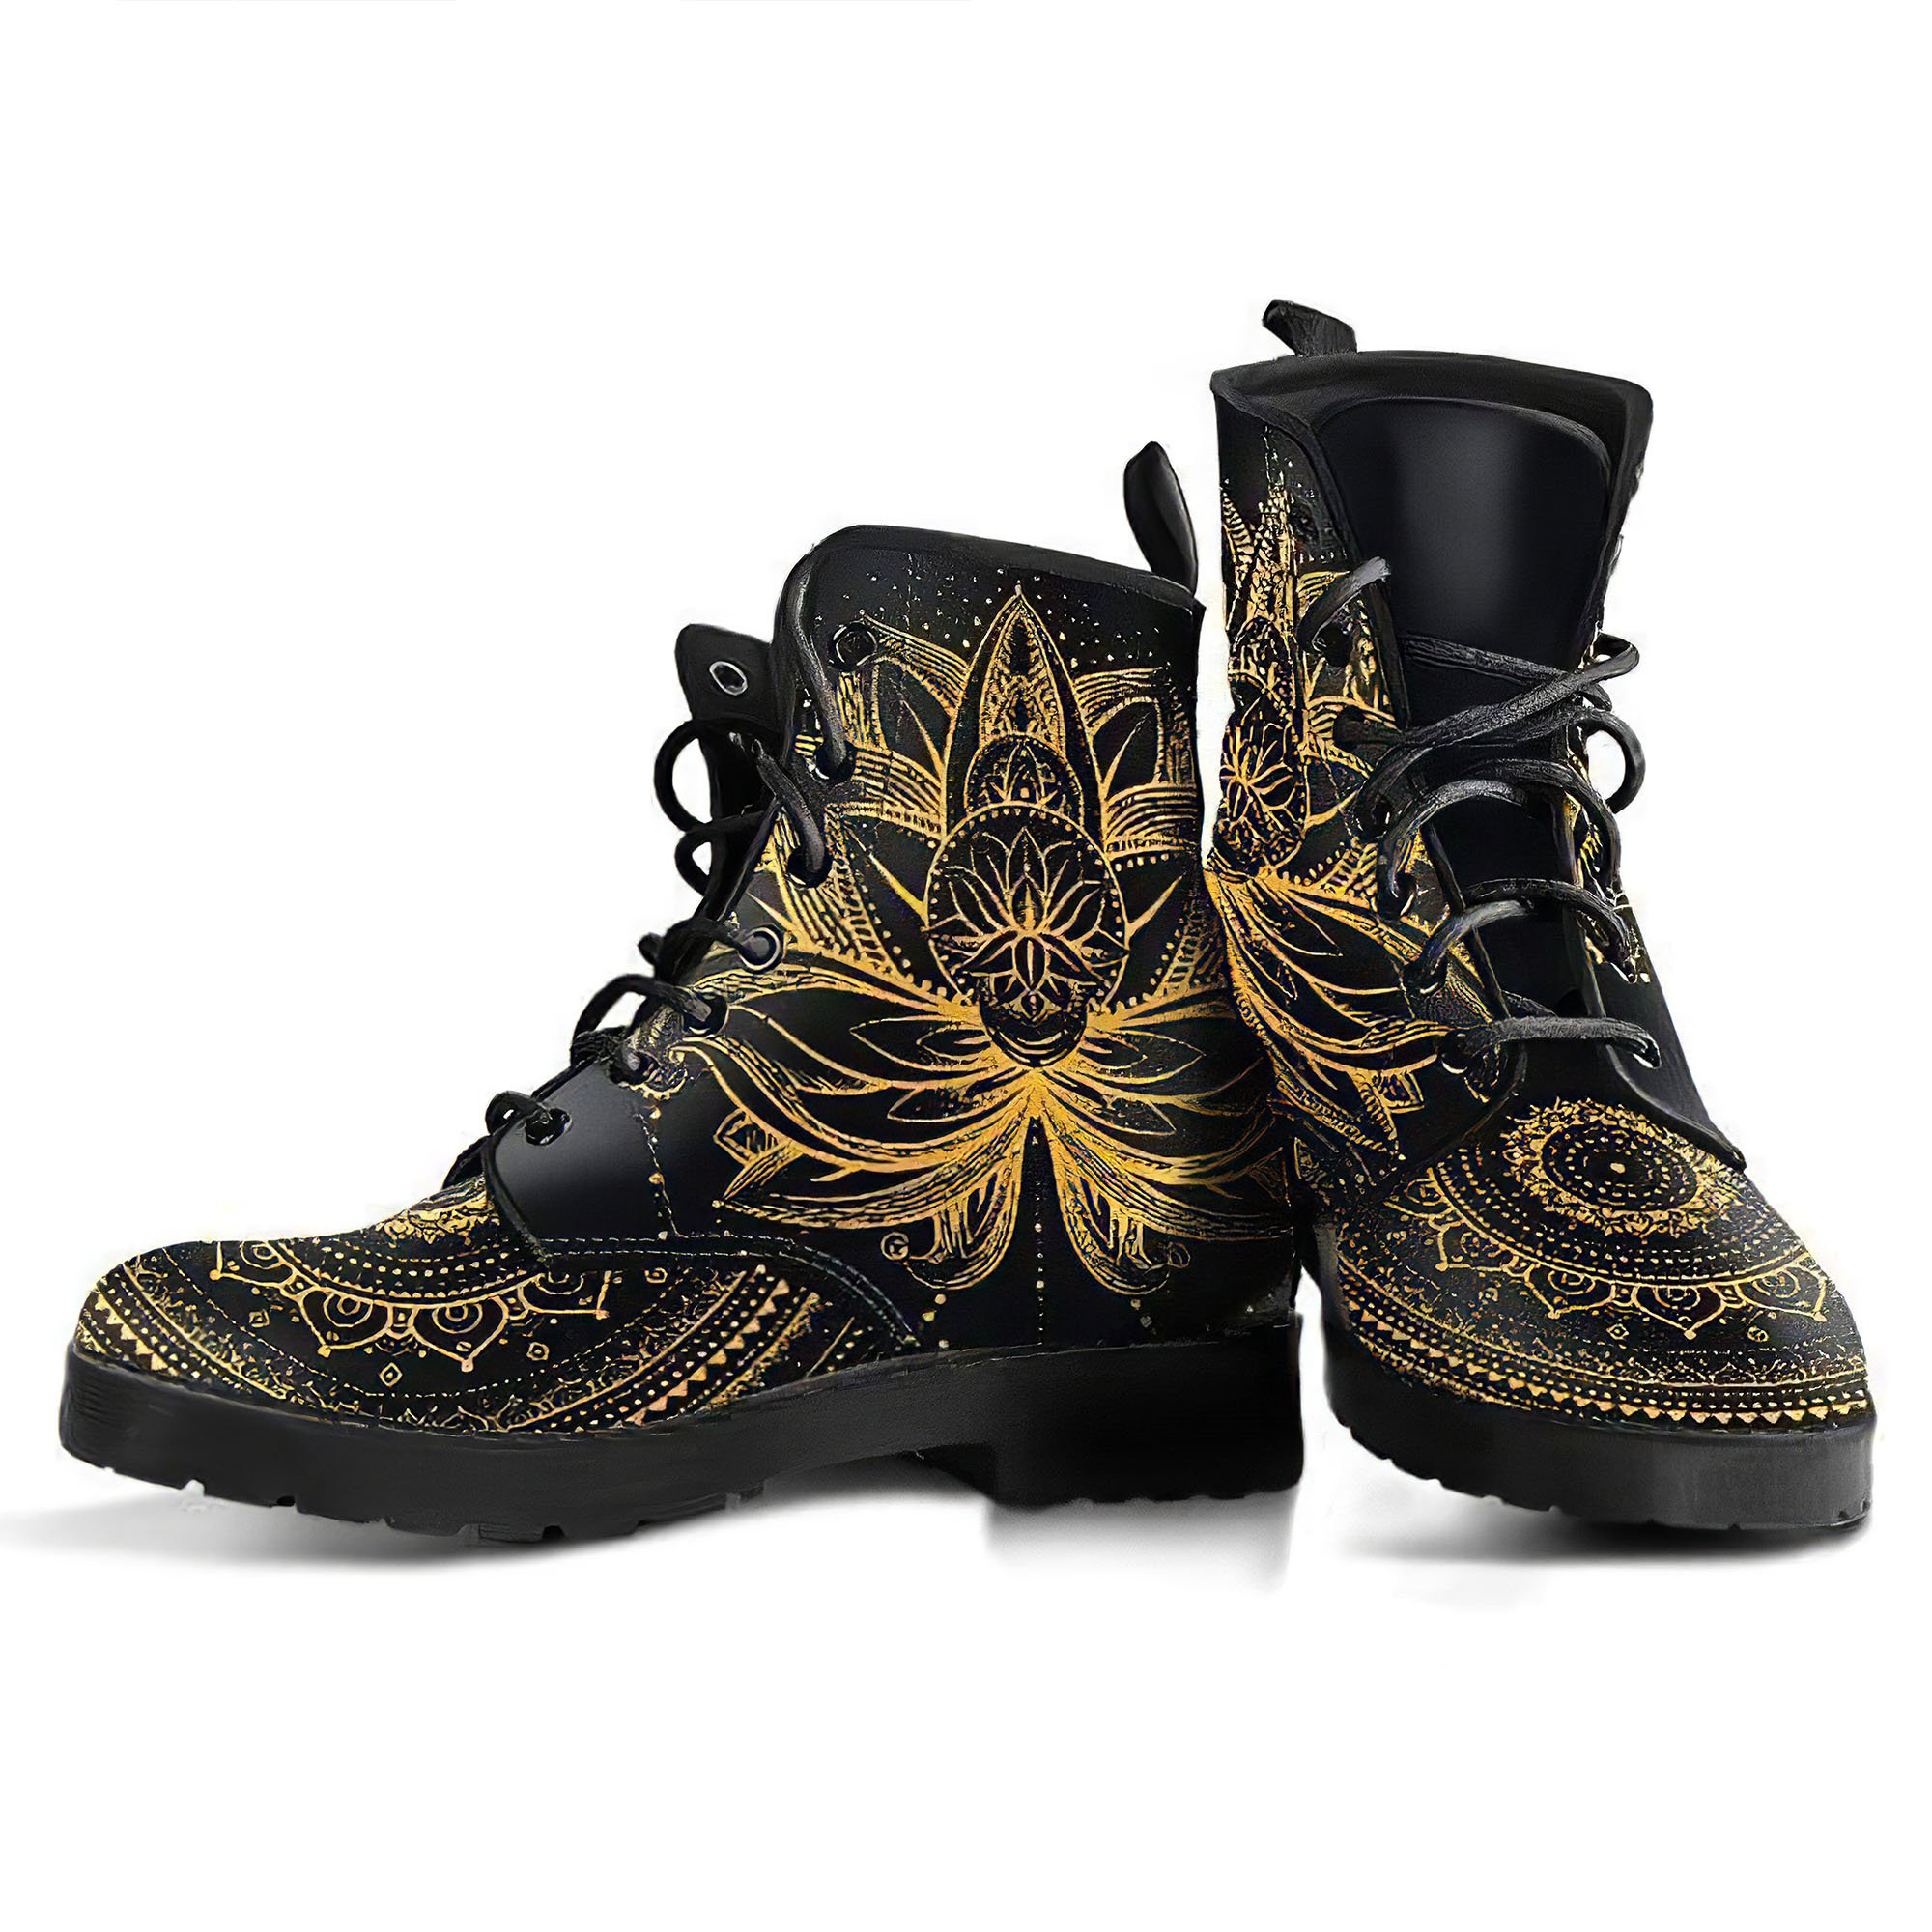 gold-lotus-womens-leather-boots-1-gp-main.jpg